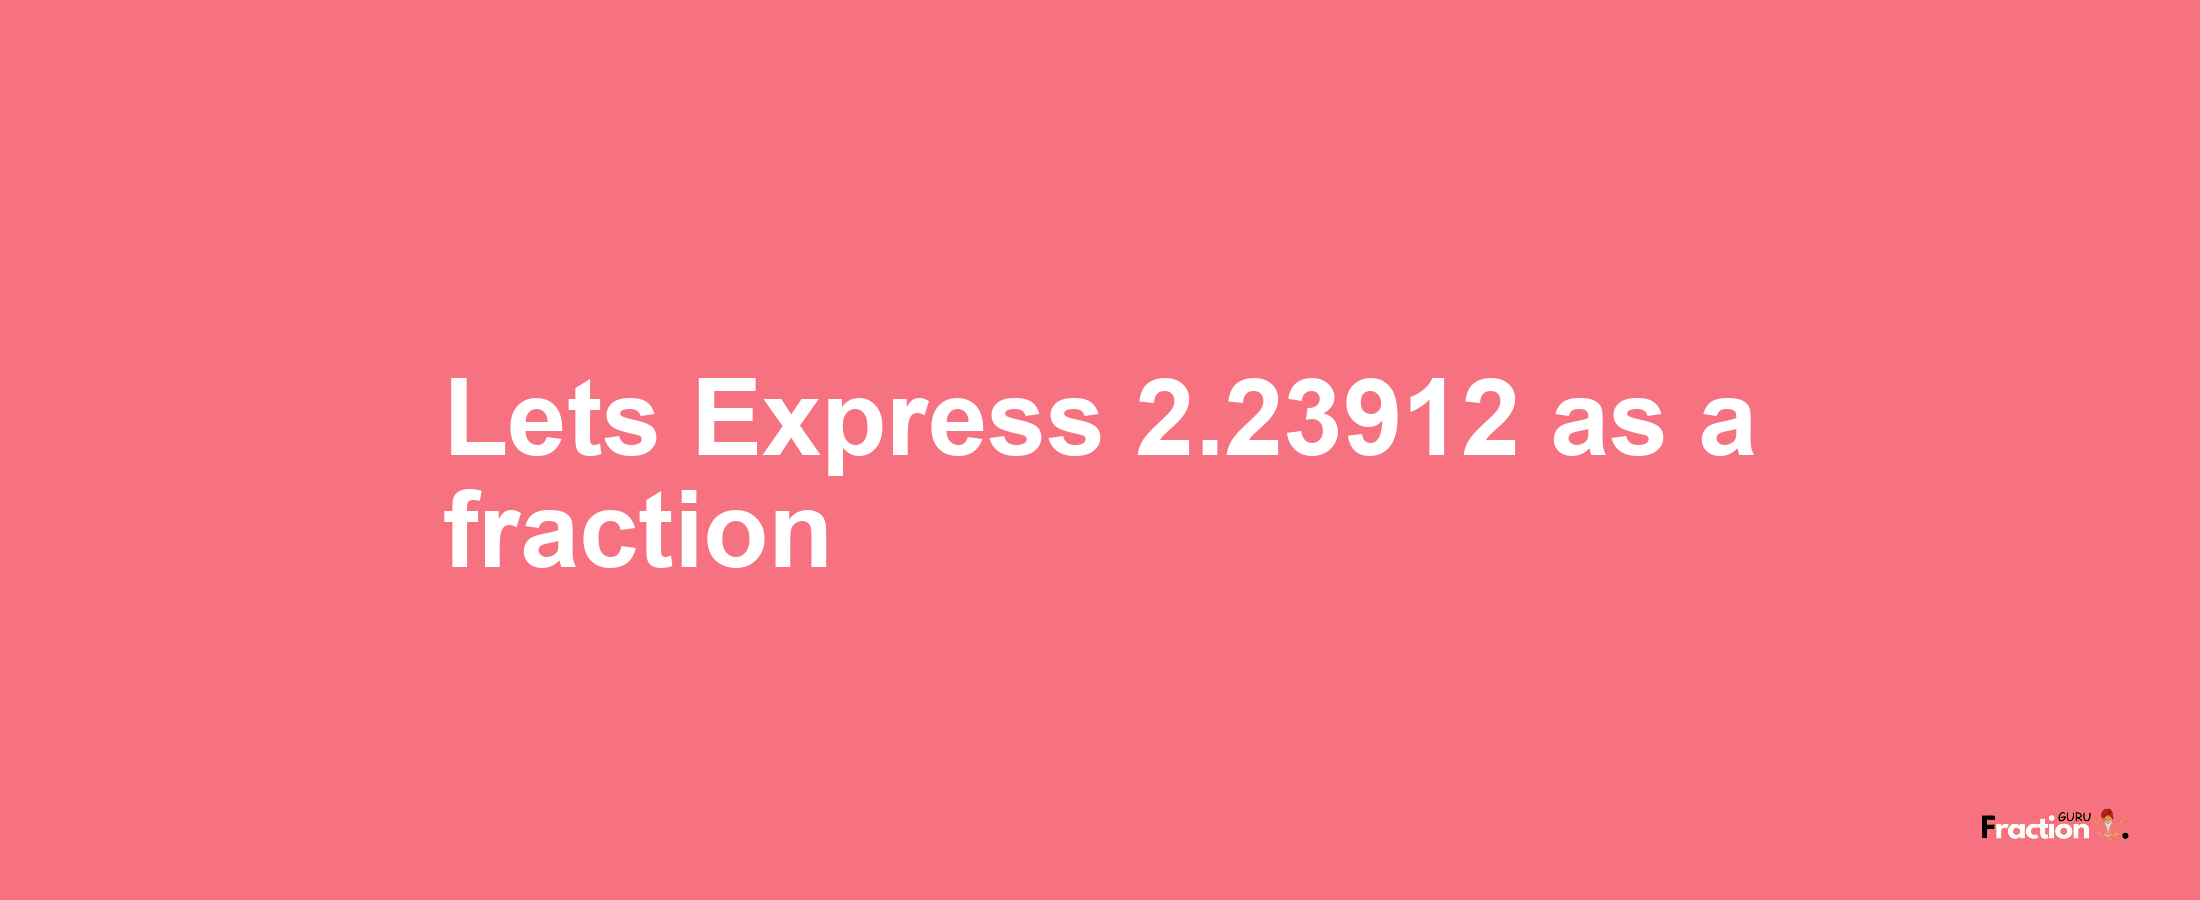 Lets Express 2.23912 as afraction